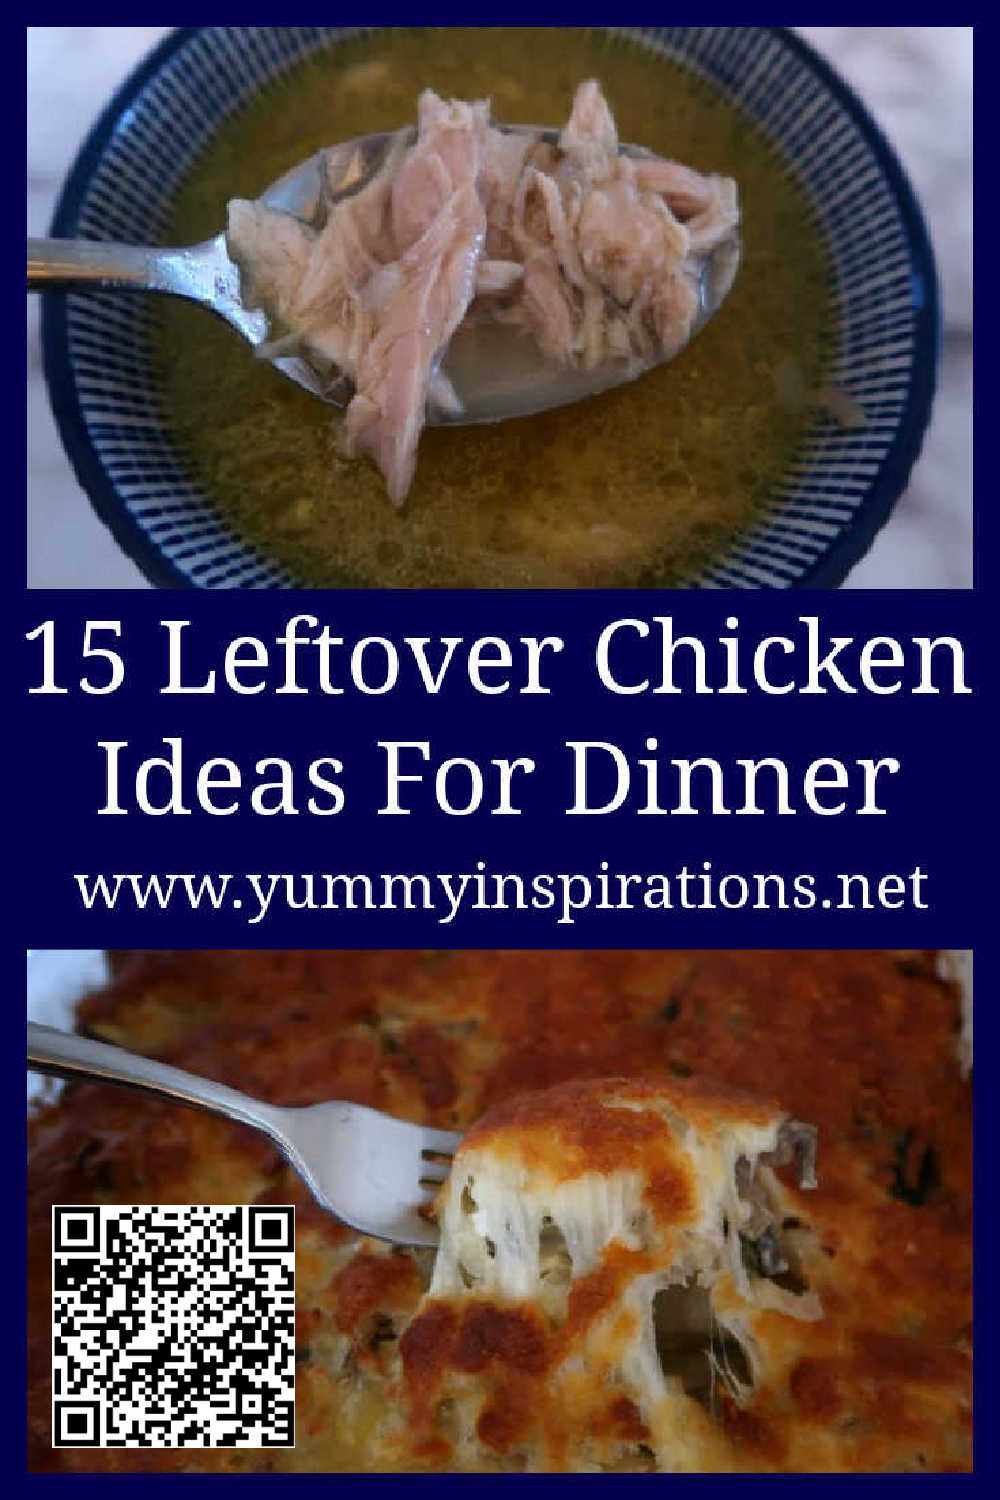 15 Leftover Chicken Ideas For Dinner - The best easy recipes for what to do with leftover roast, curry, breast or chicken tenders for simple delicious meals.